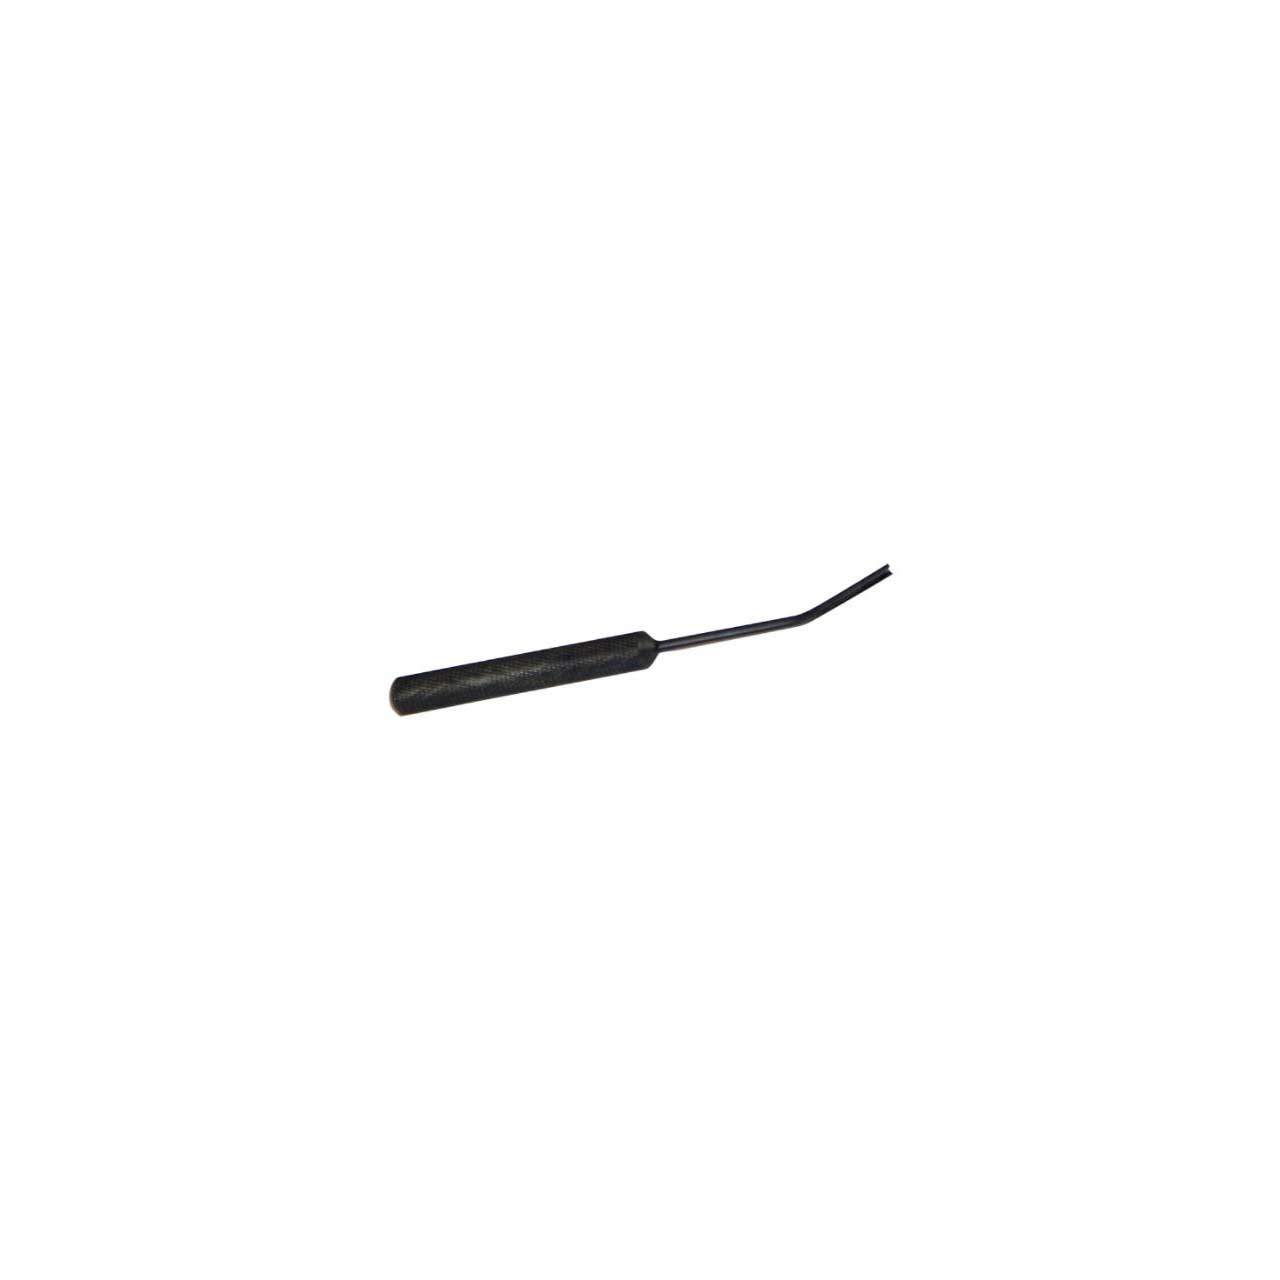 Bittree EPIN Insertion Tool 516-280-400 for EDAC / Elco Connectors